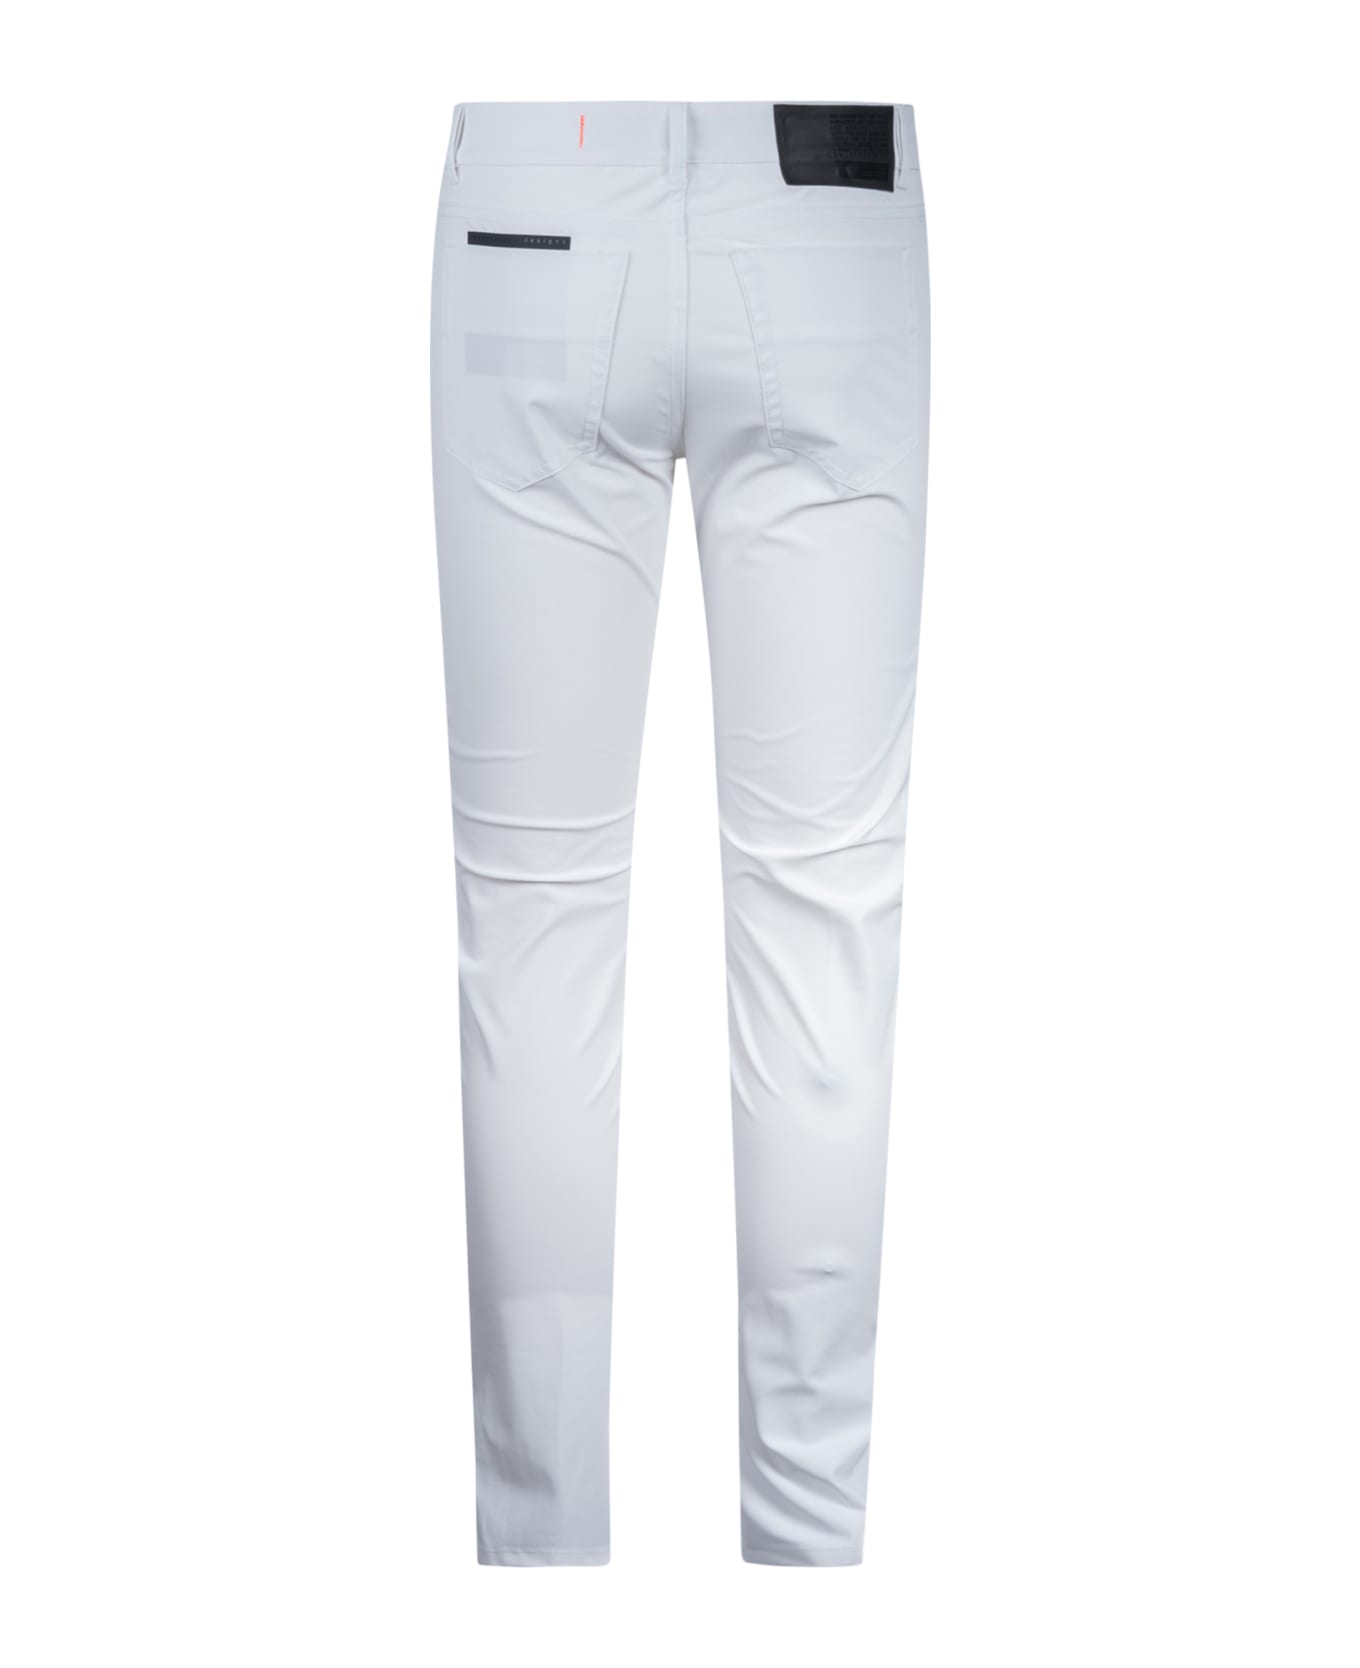 RRD - Roberto Ricci Design Skinny Fitted Jeans - White